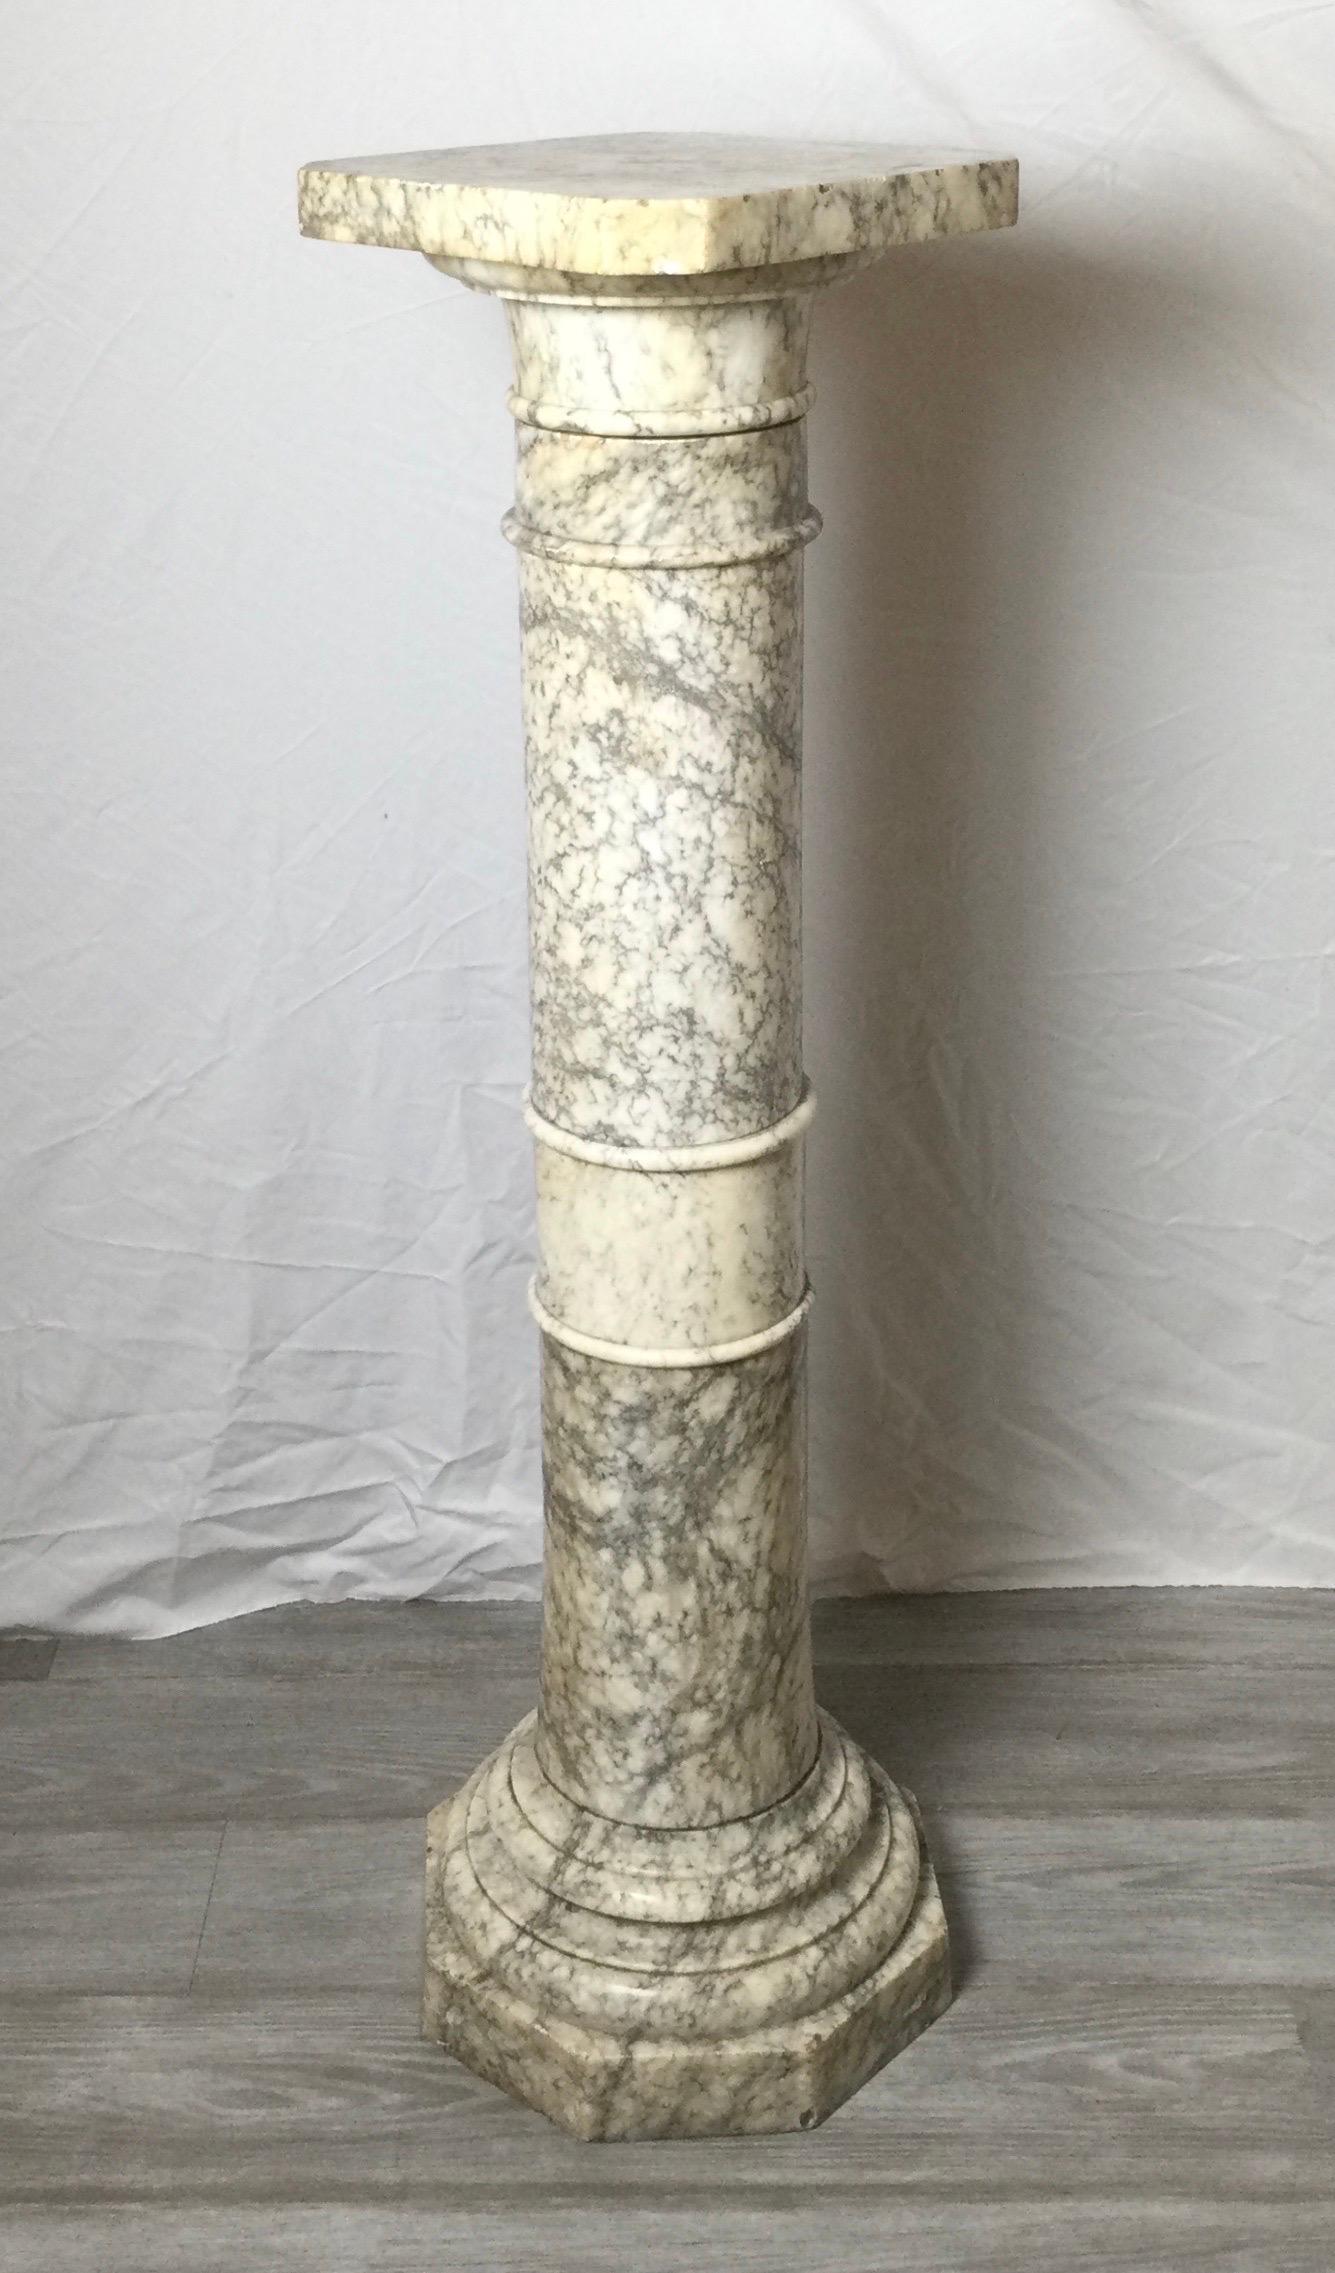 Early 20th century solid Italian marble pedestal. The column form with square top which can be rotated in place to view a sculpture fram any side. The white marble with black and grey veining. Slight wear to the edges from age.